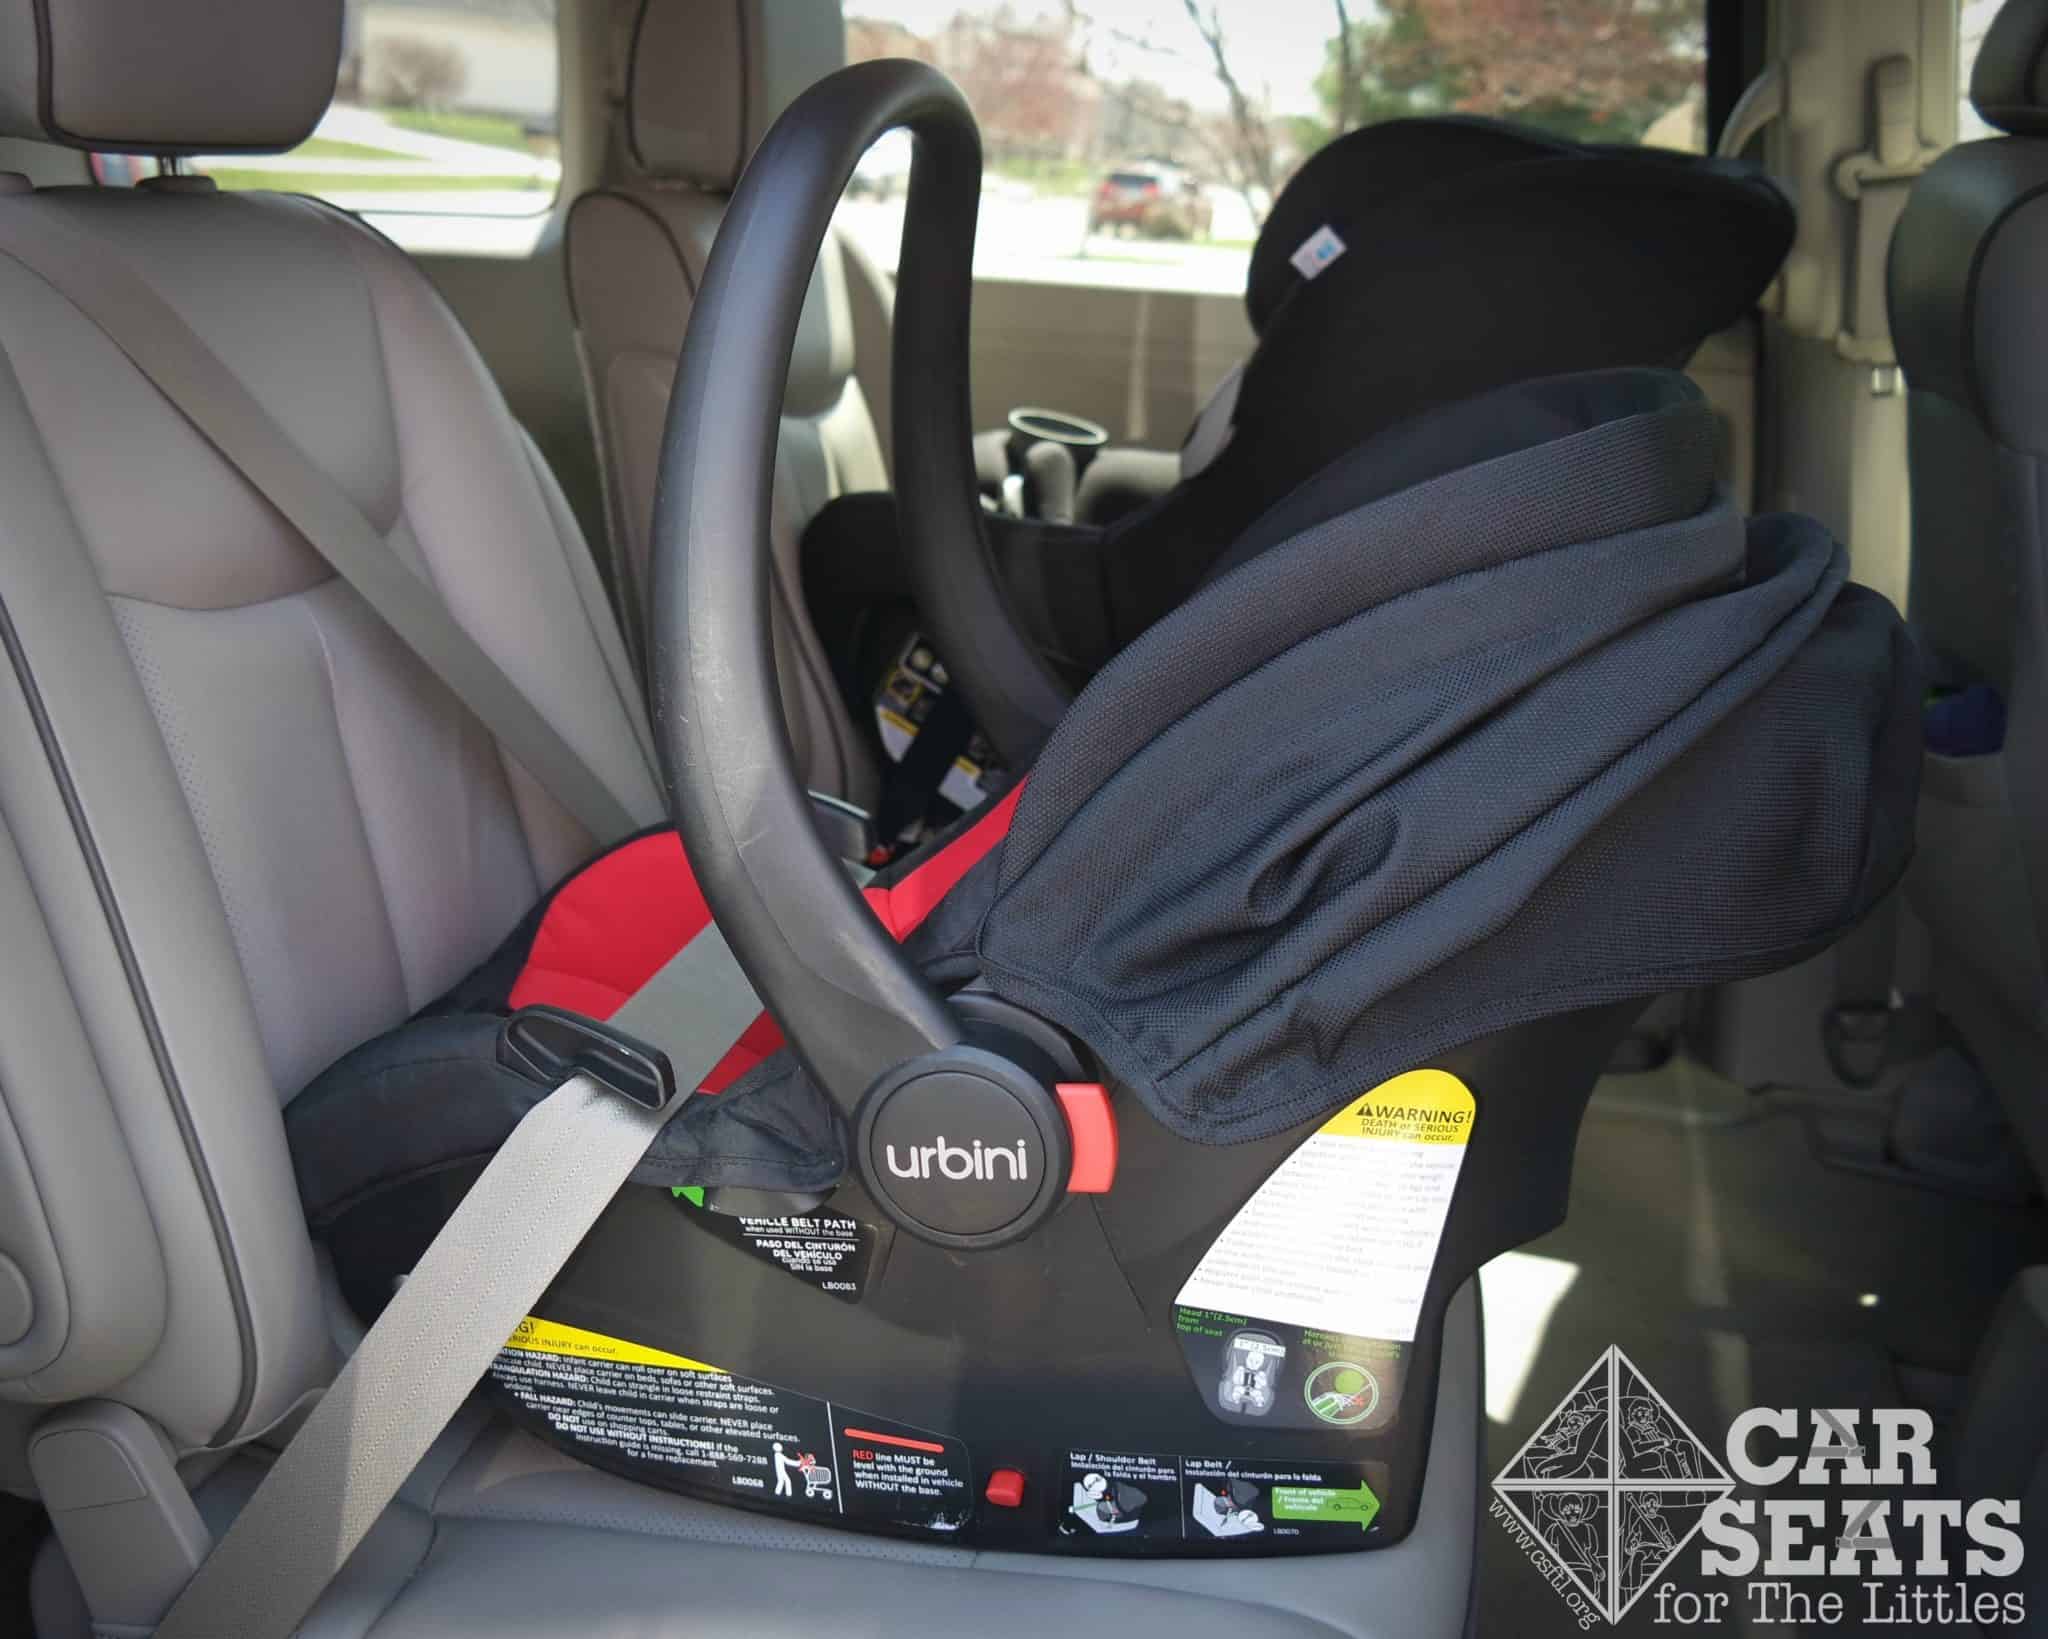 Rear Facing Only Seat Without The Base, How To Put Car Seat With Seatbelt